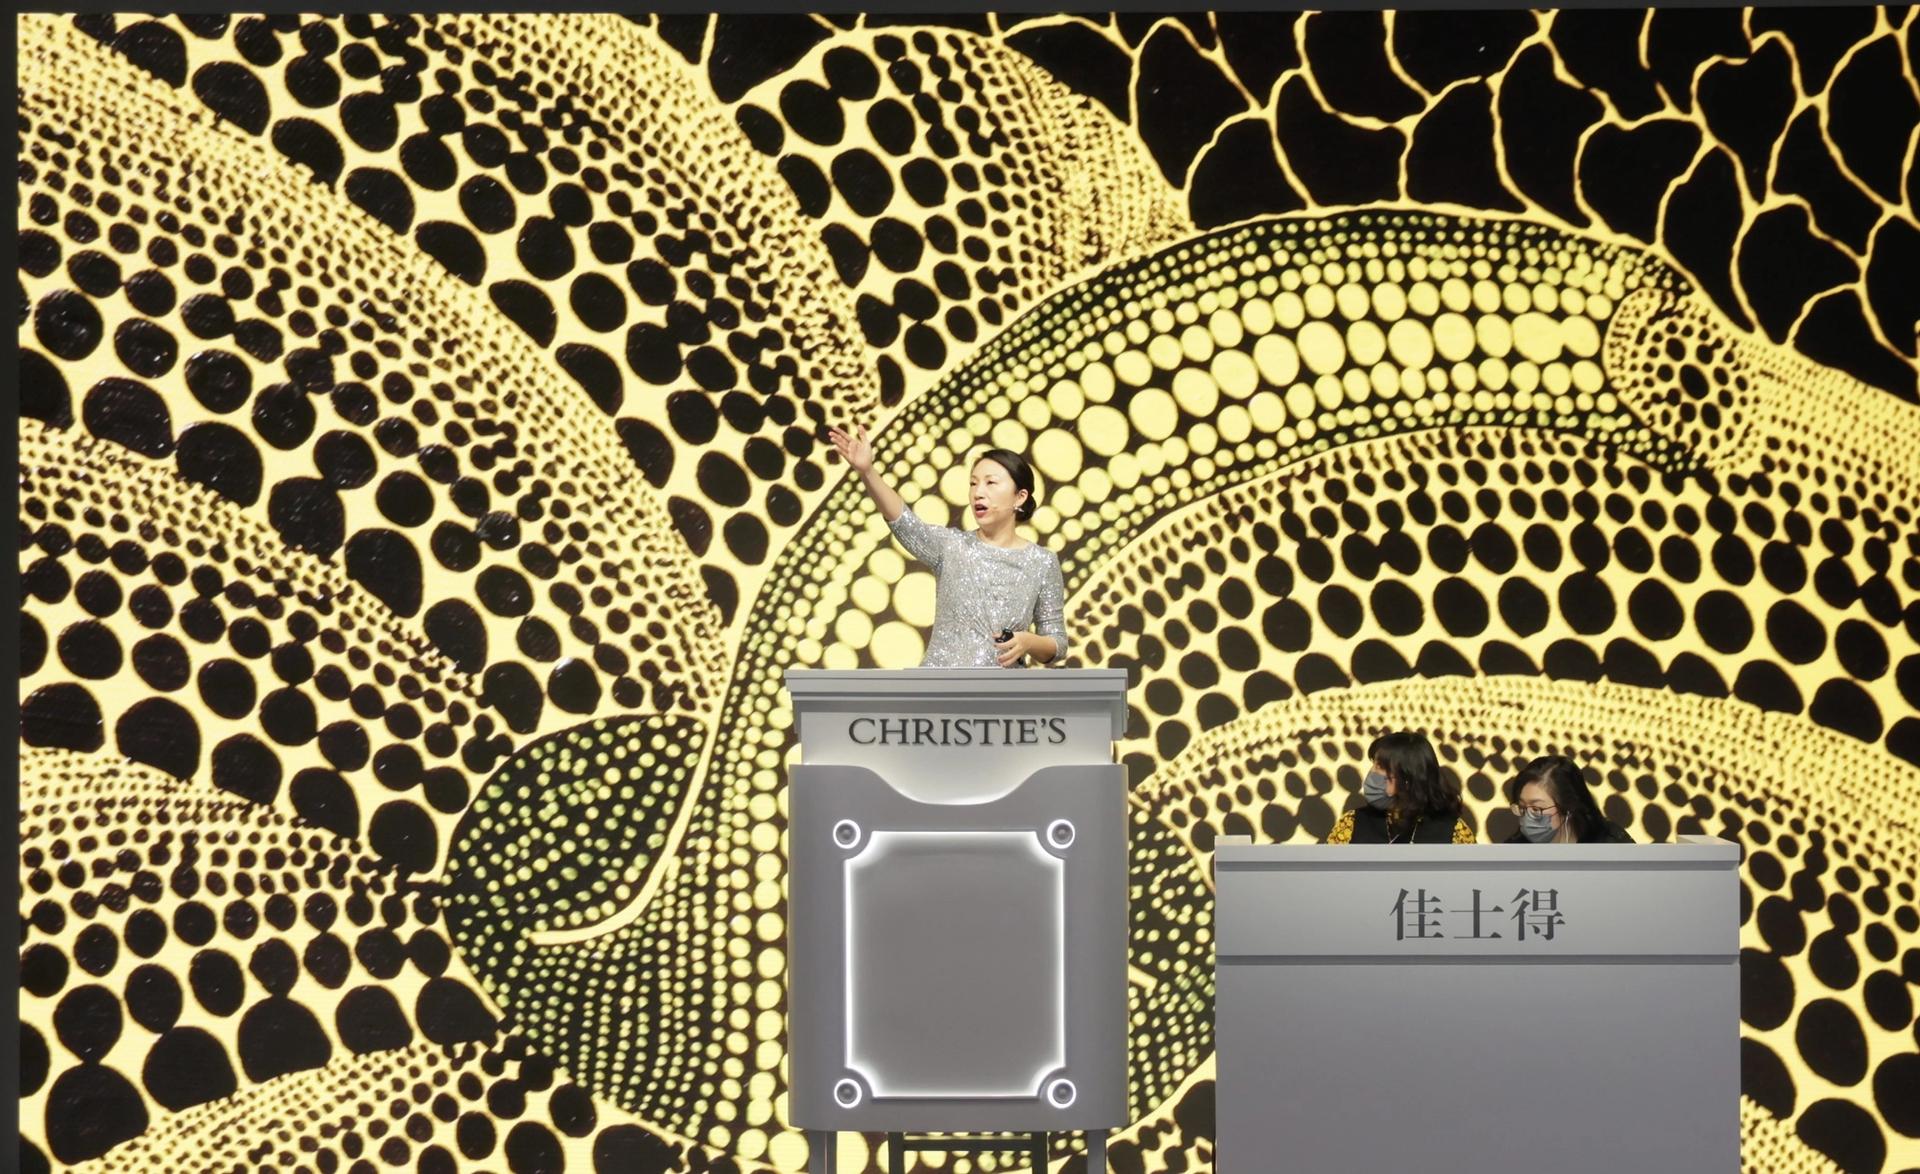 Christie's auctioneer Elaine Kwok selling a record-setting Pumpkin by Yayoi Kusama for $495m in Hong Kong earlier this year

Courtesy of Christie's